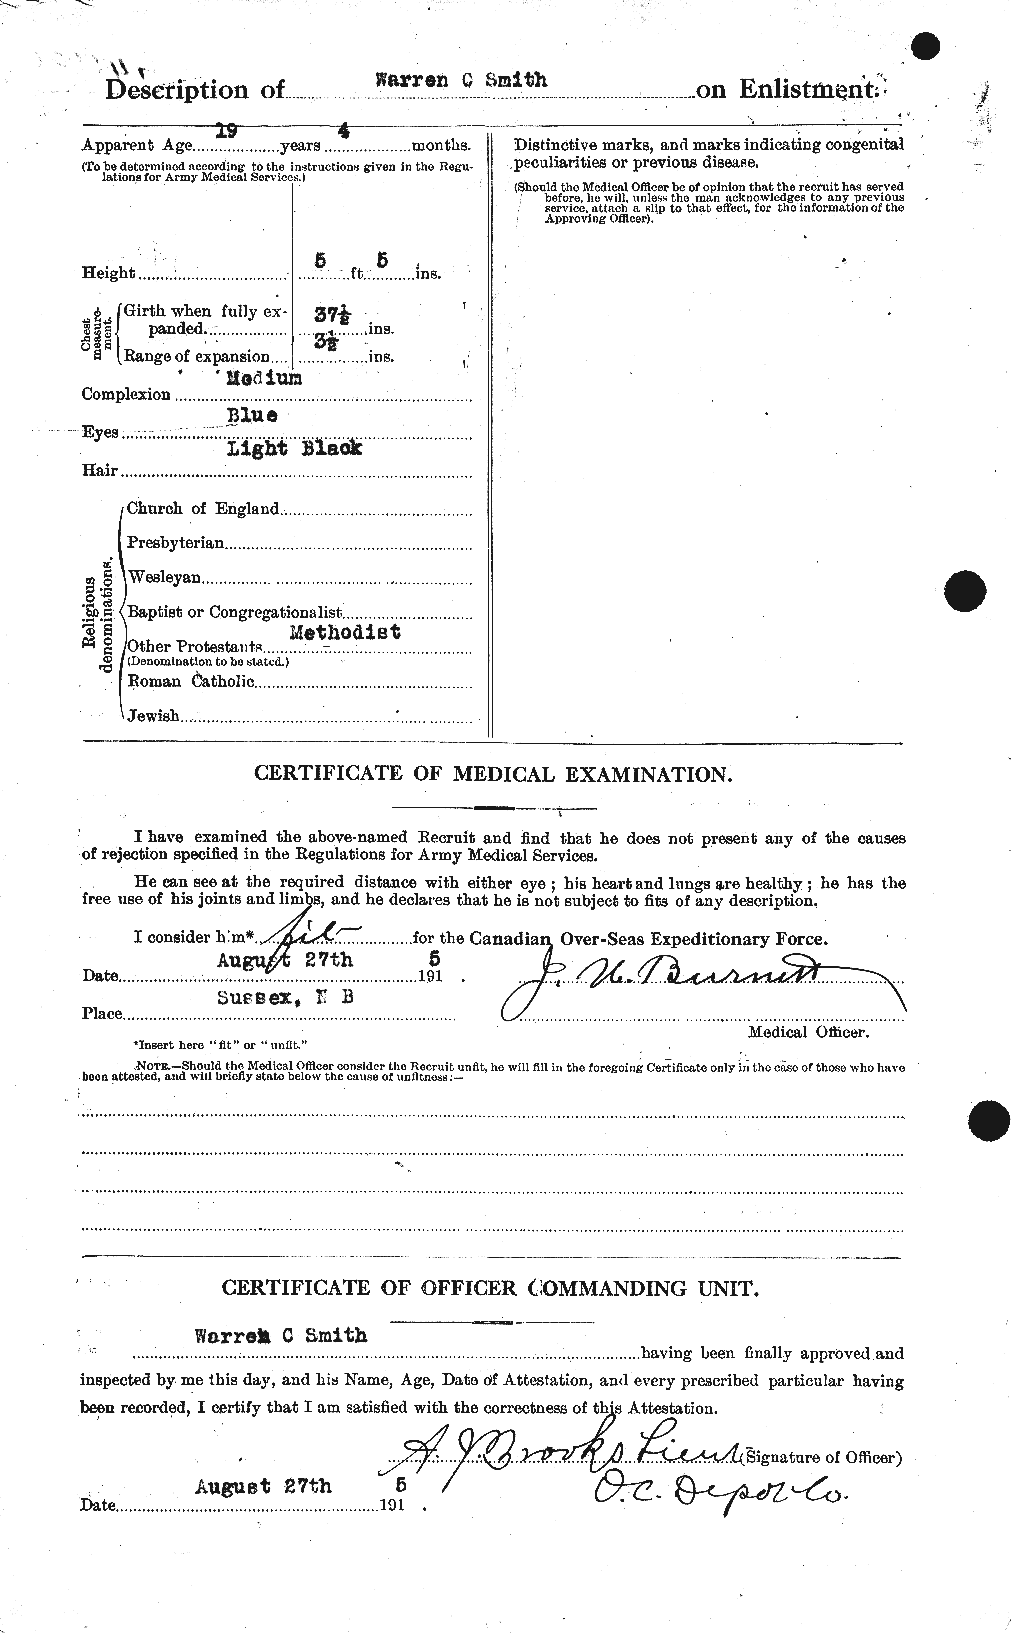 Personnel Records of the First World War - CEF 104638b